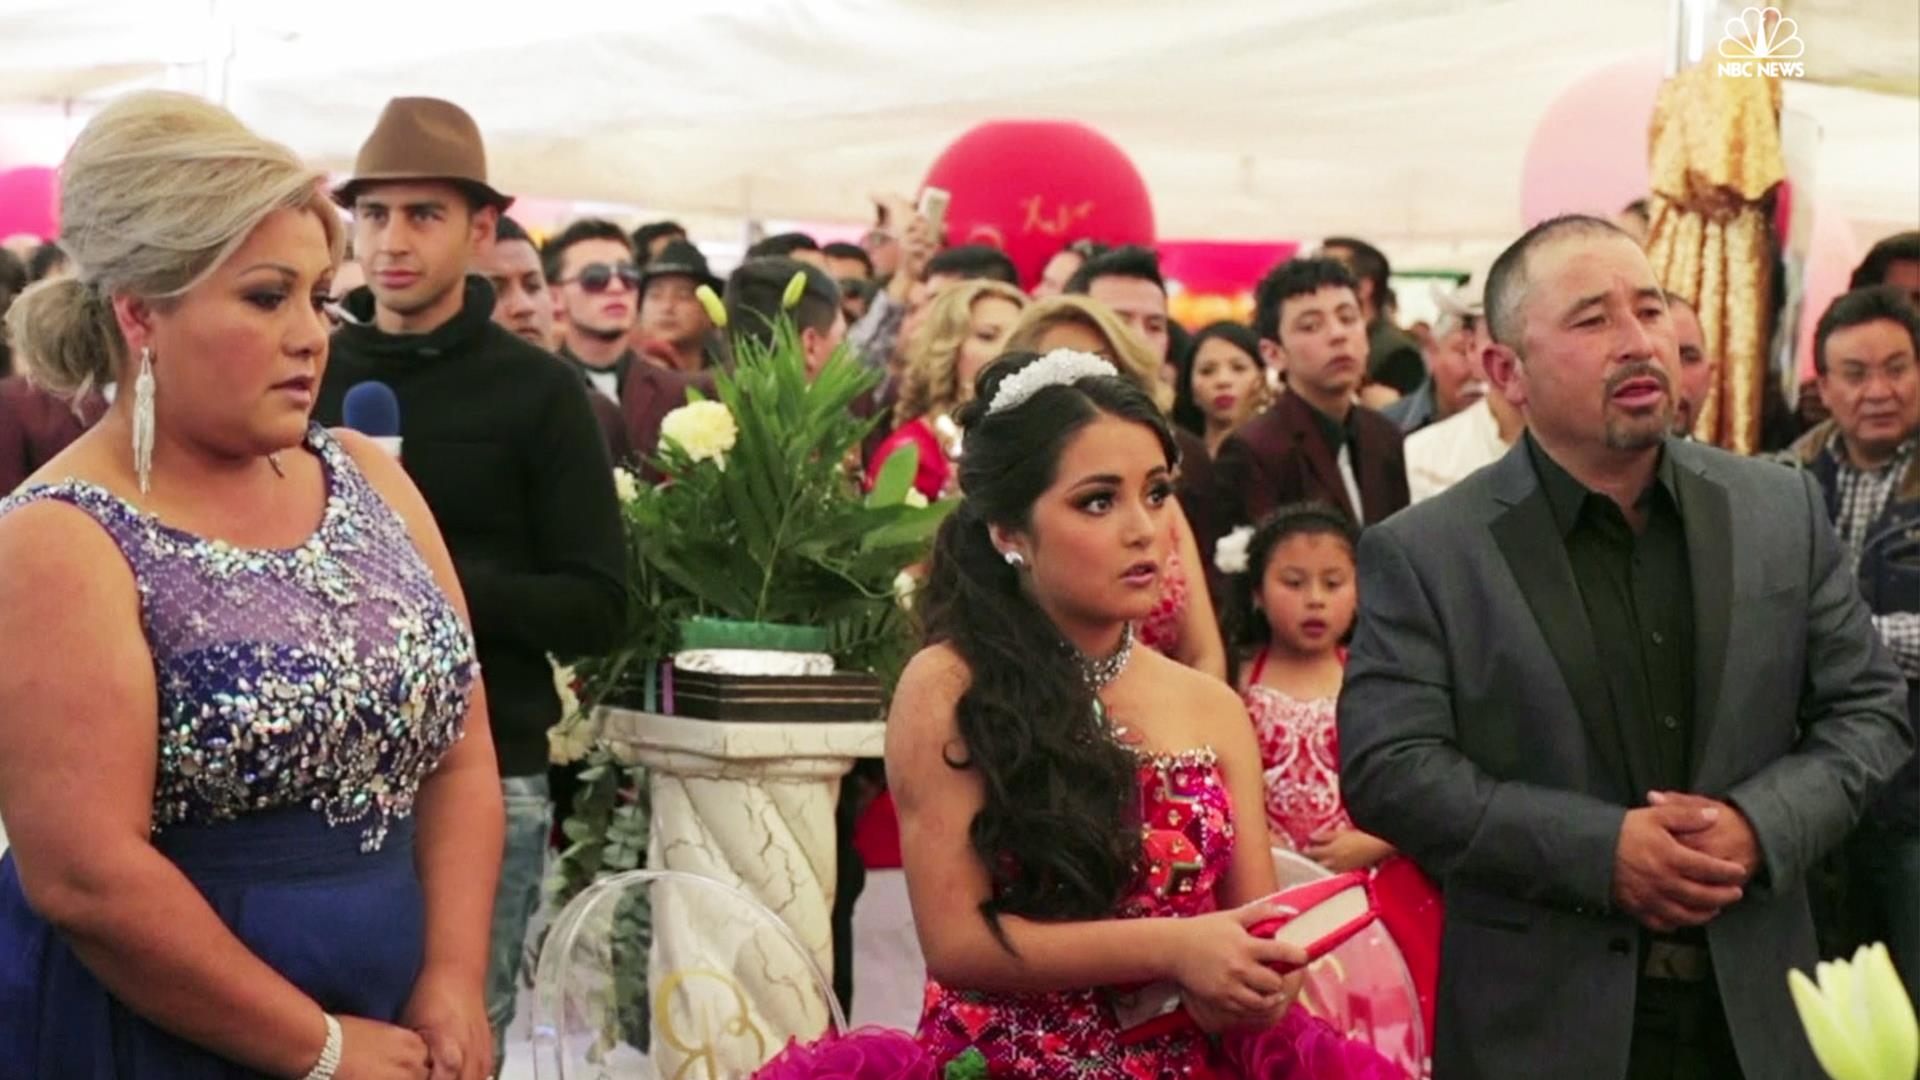 Thousands Attend Mexican Girl's 15th Birthday Party After Invite Goes Viral